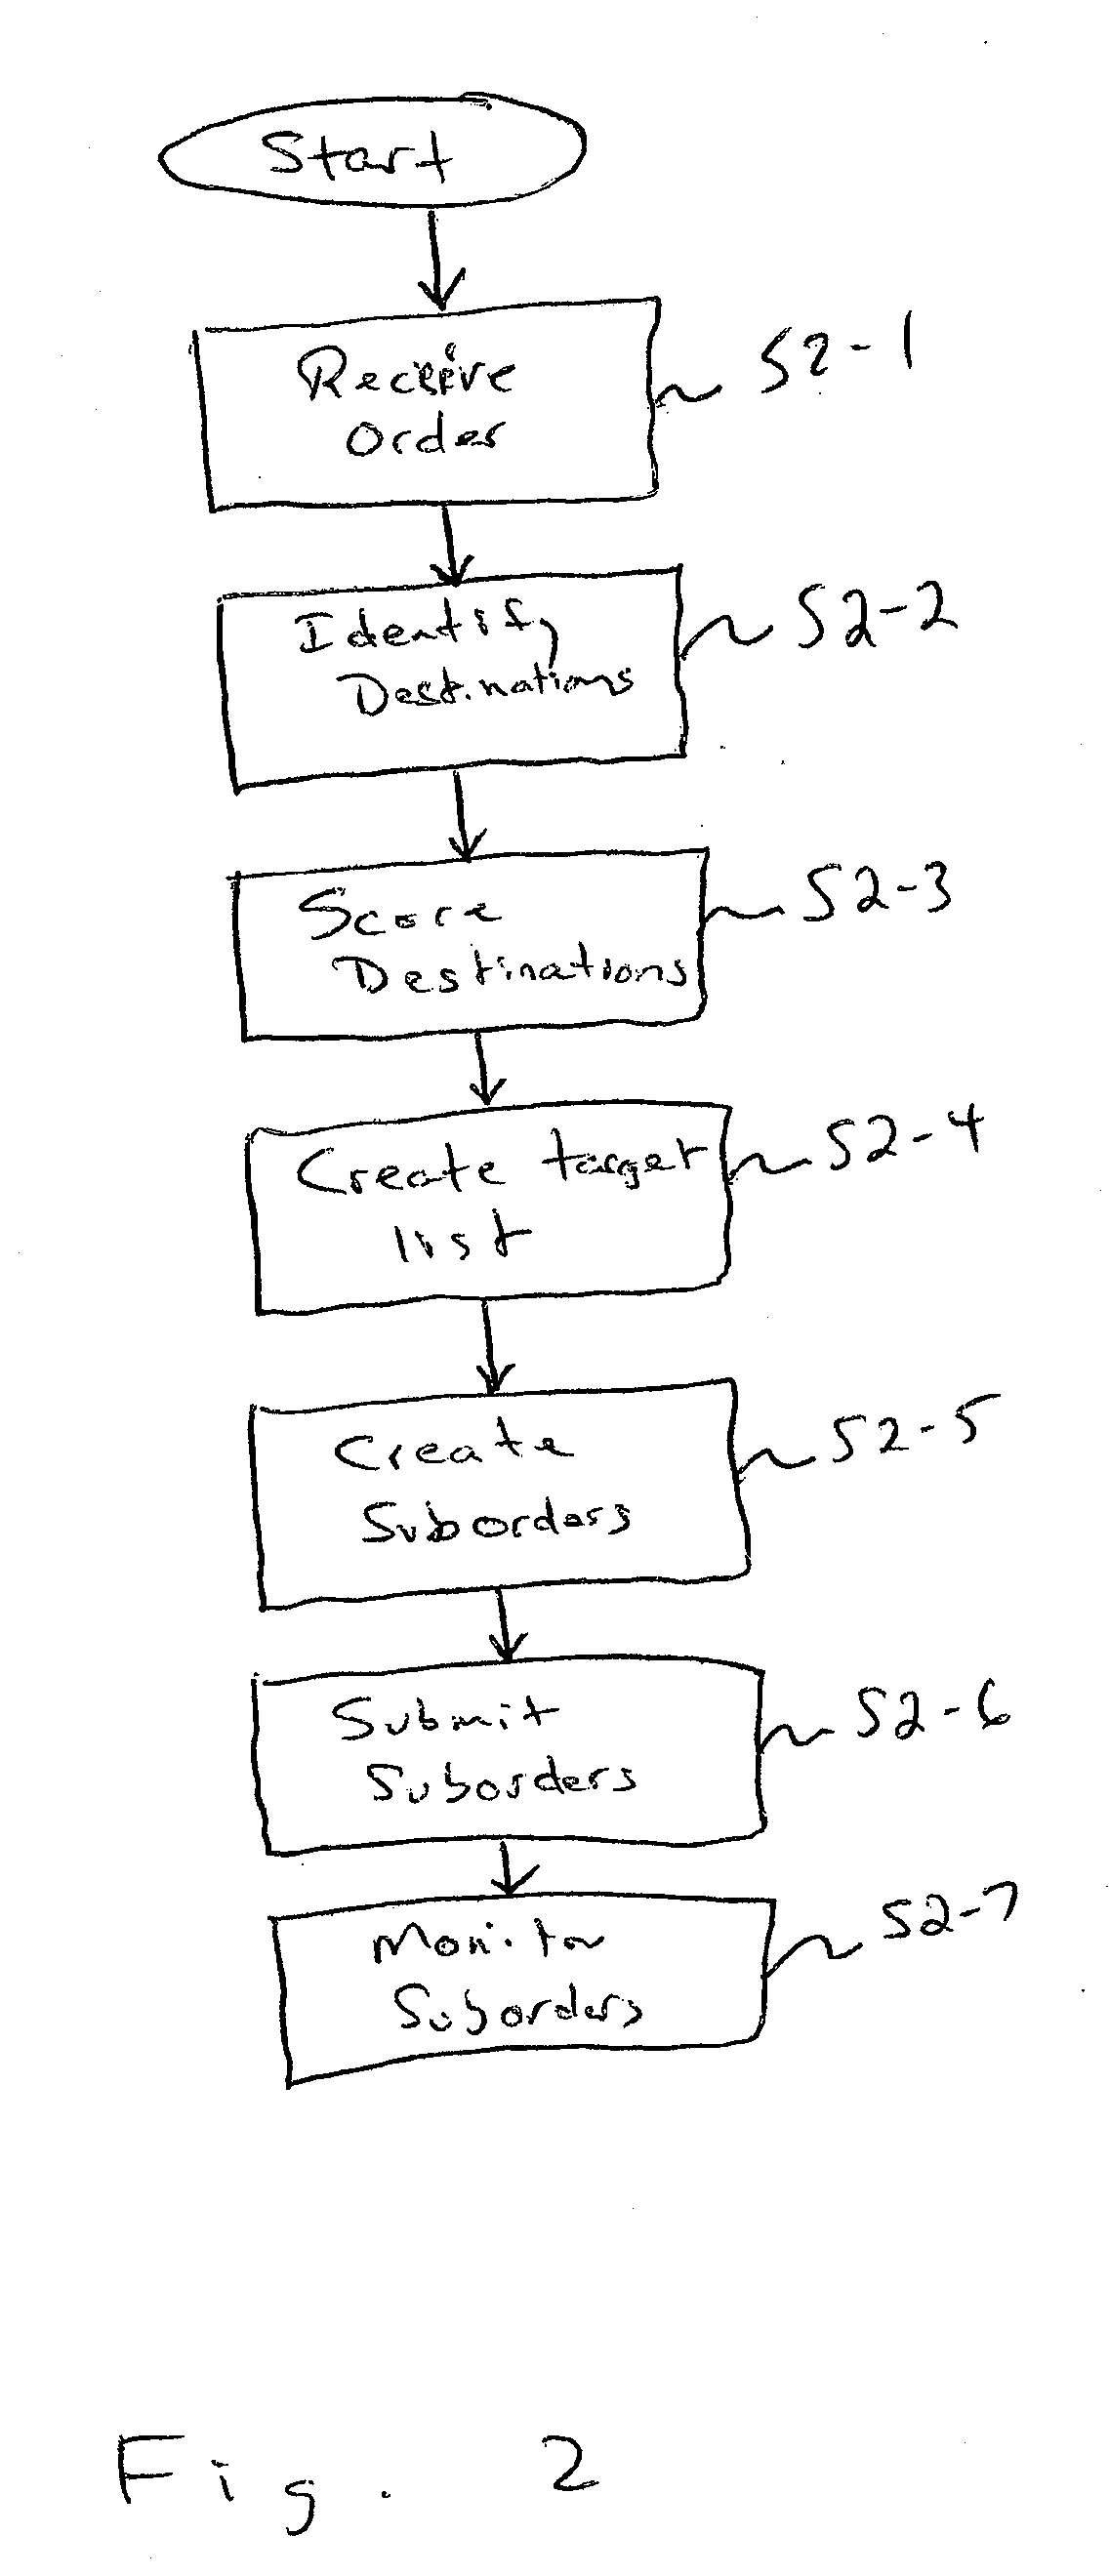 System and method for allocating electronic trade orders among a plurality of electronic trade venues